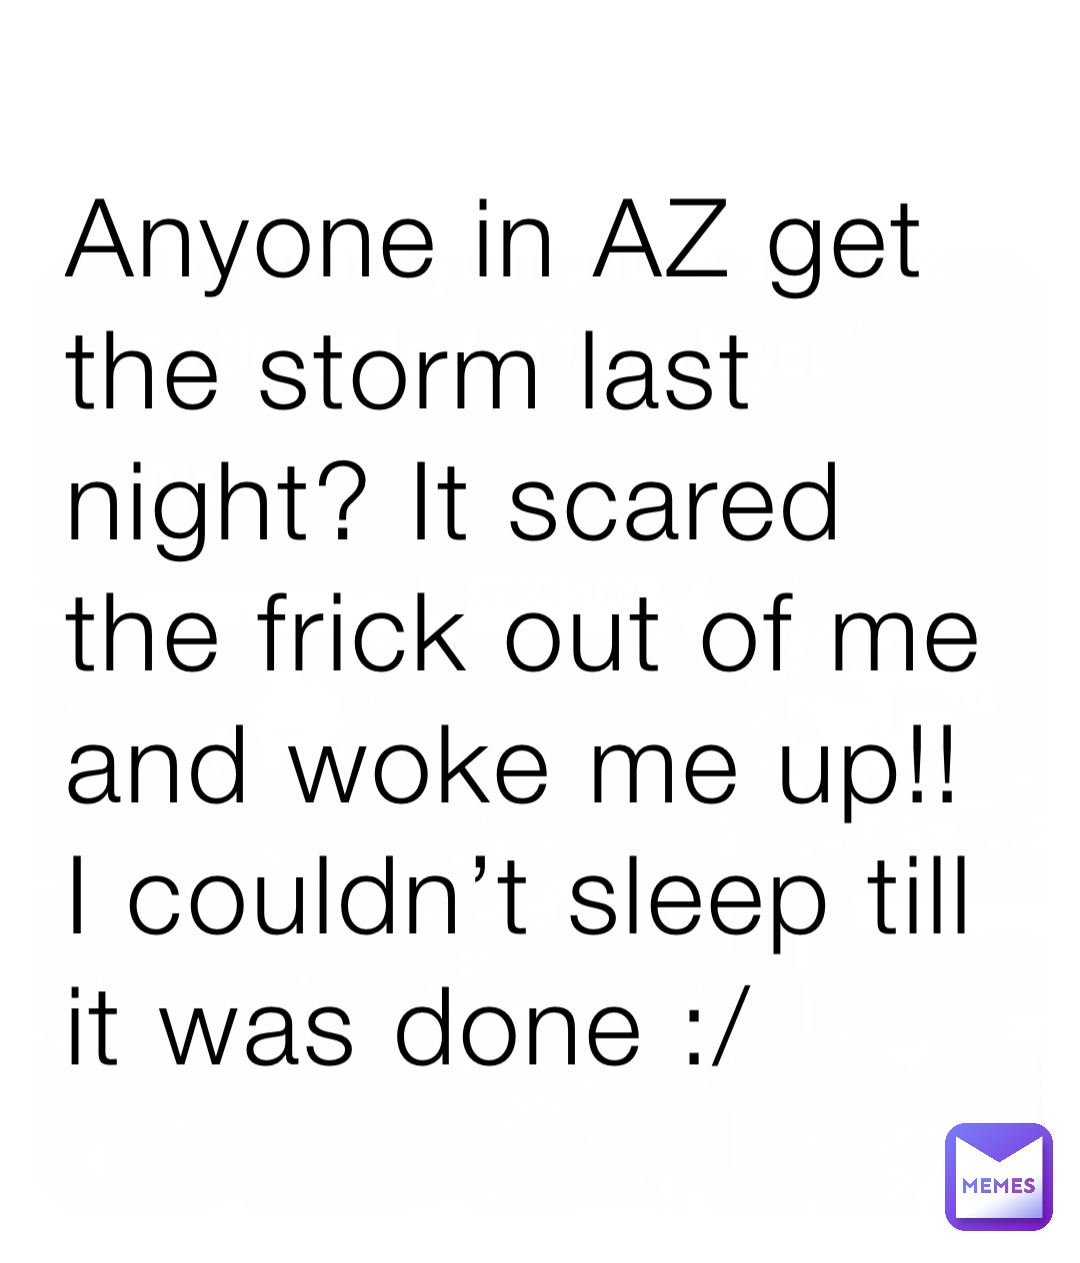 Anyone in AZ get the storm last night? It scared the frick out of me and woke me up!! I couldn’t sleep till it was done :/